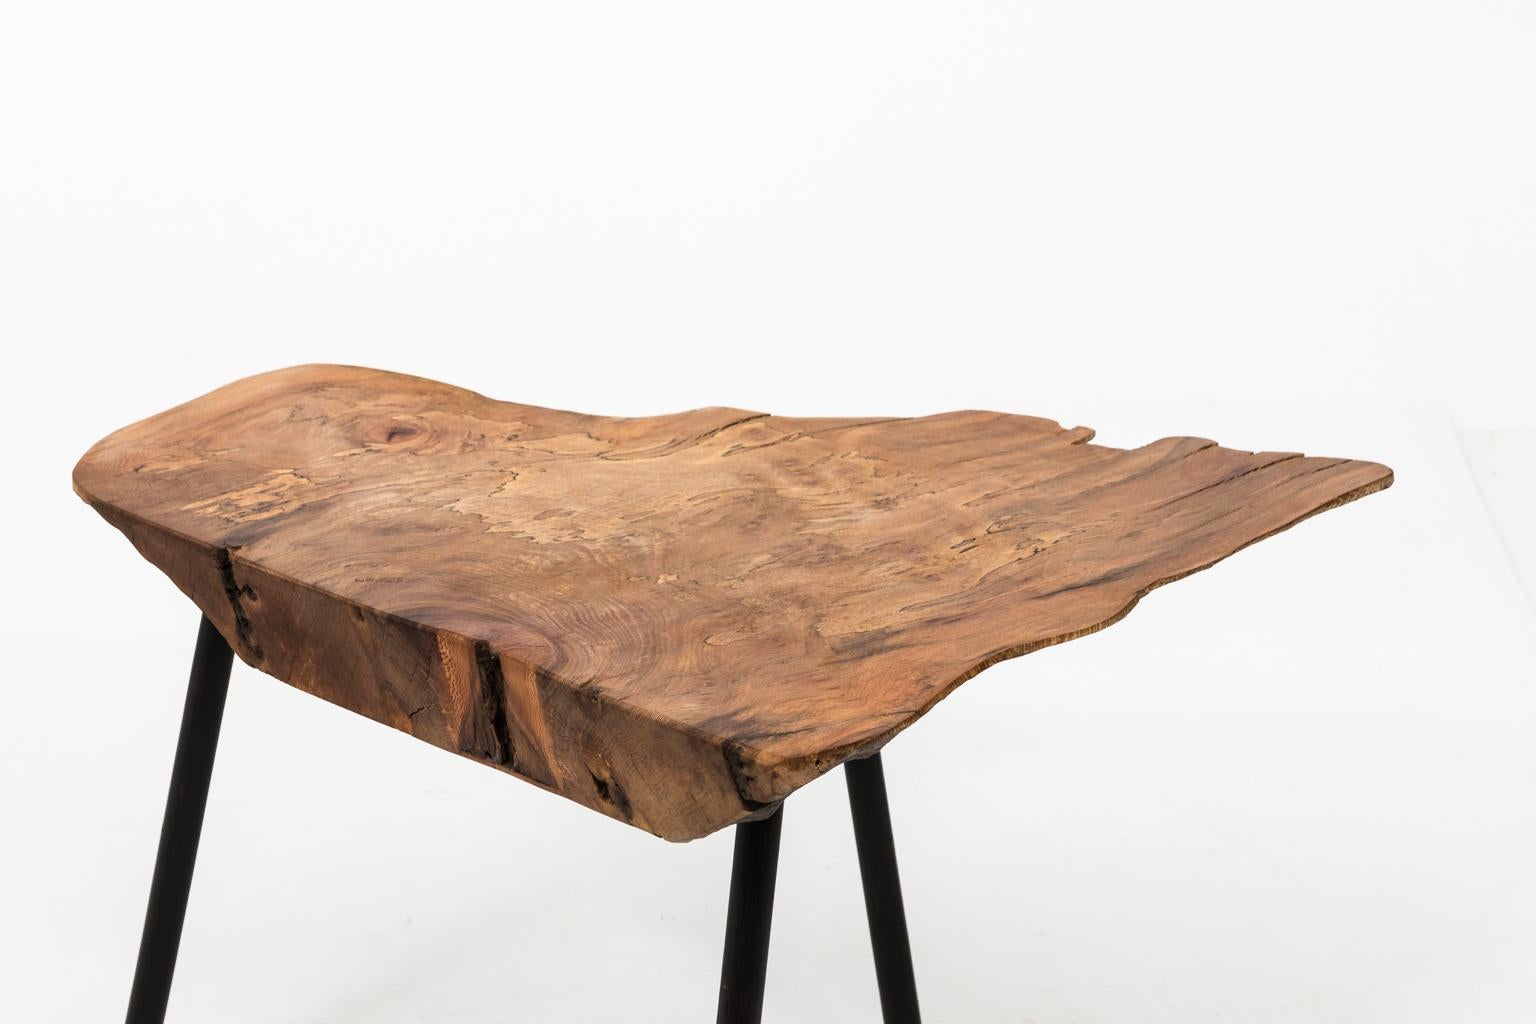 Modern Freeform Walnut Table, circa 2000 In Good Condition For Sale In Stamford, CT